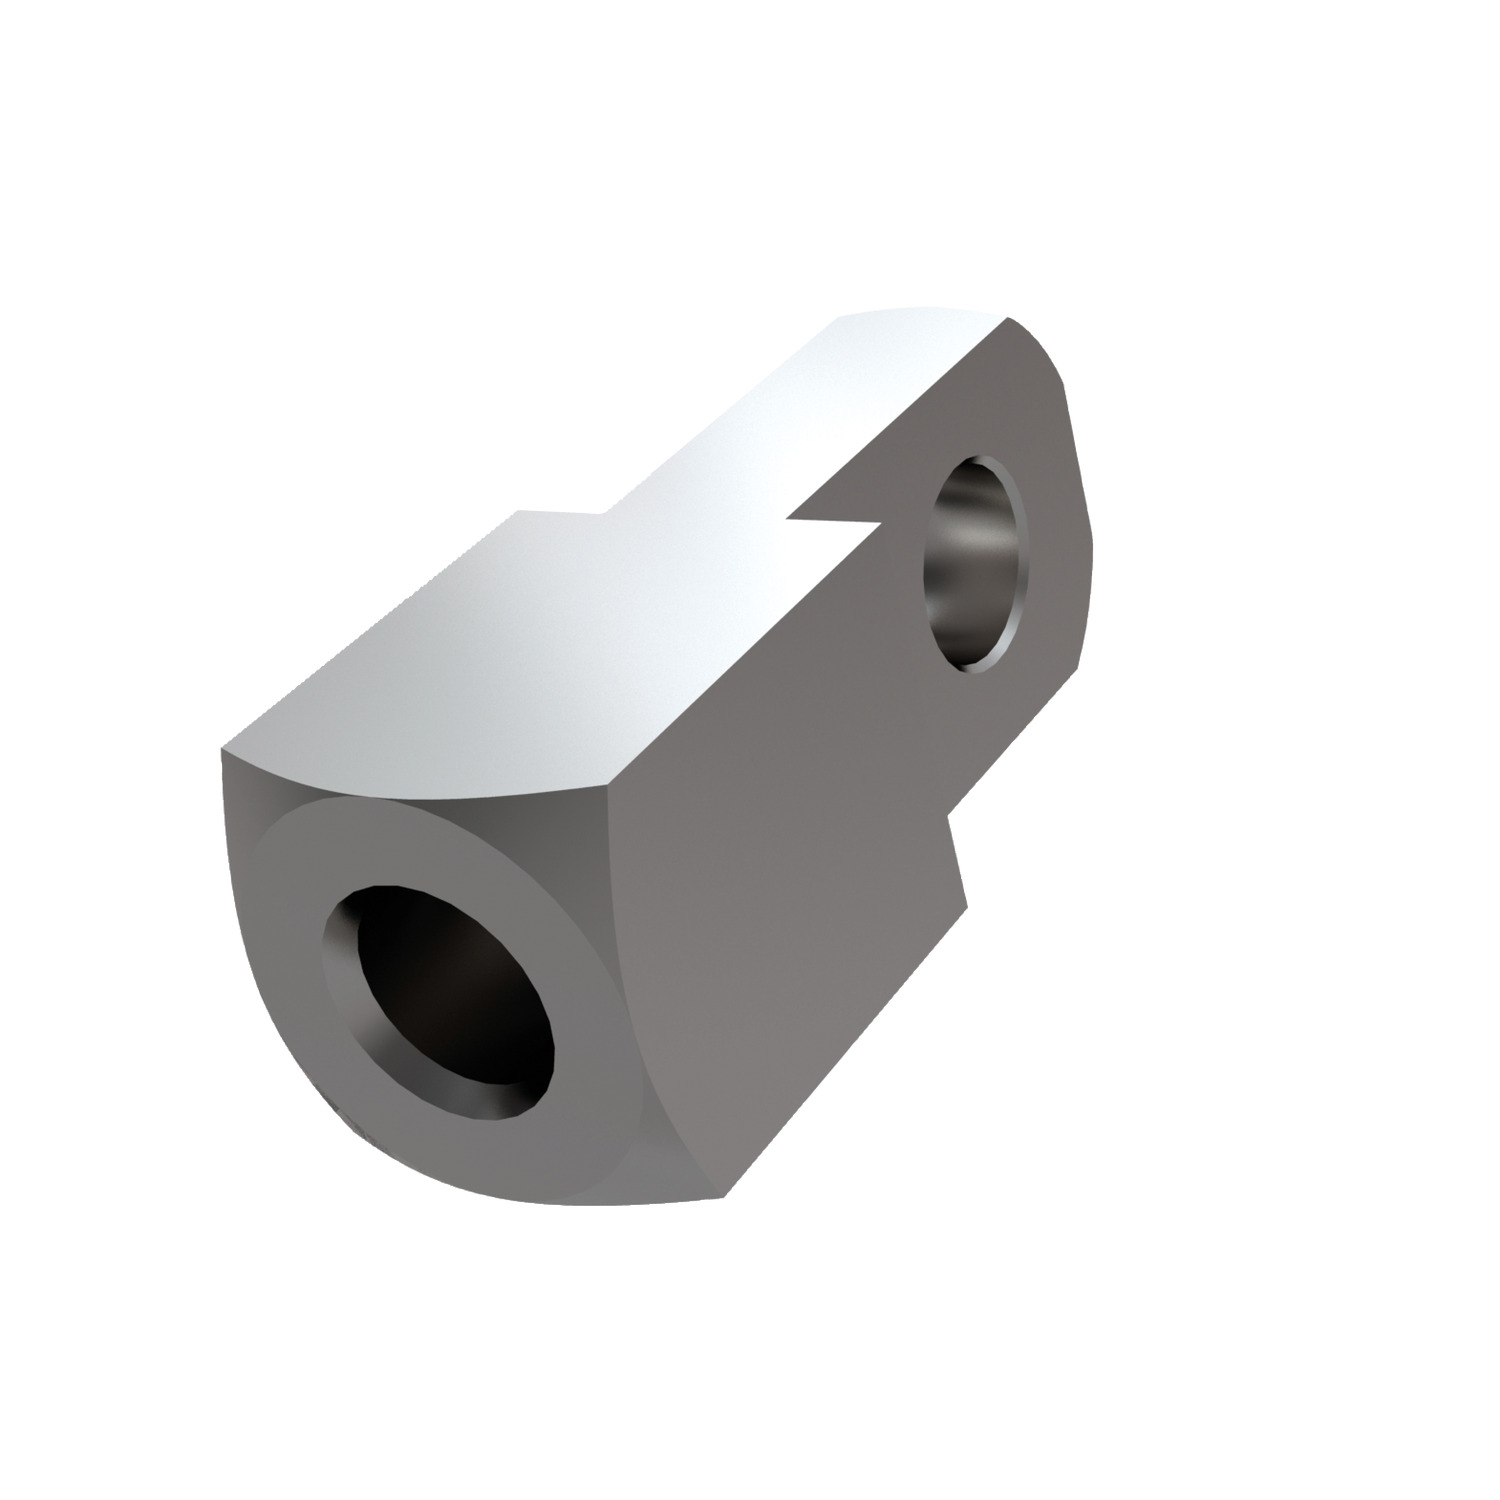 65657.W0008 Mating Piece for Clevis Joints - S/S. Left - Coarse - 8 - 12